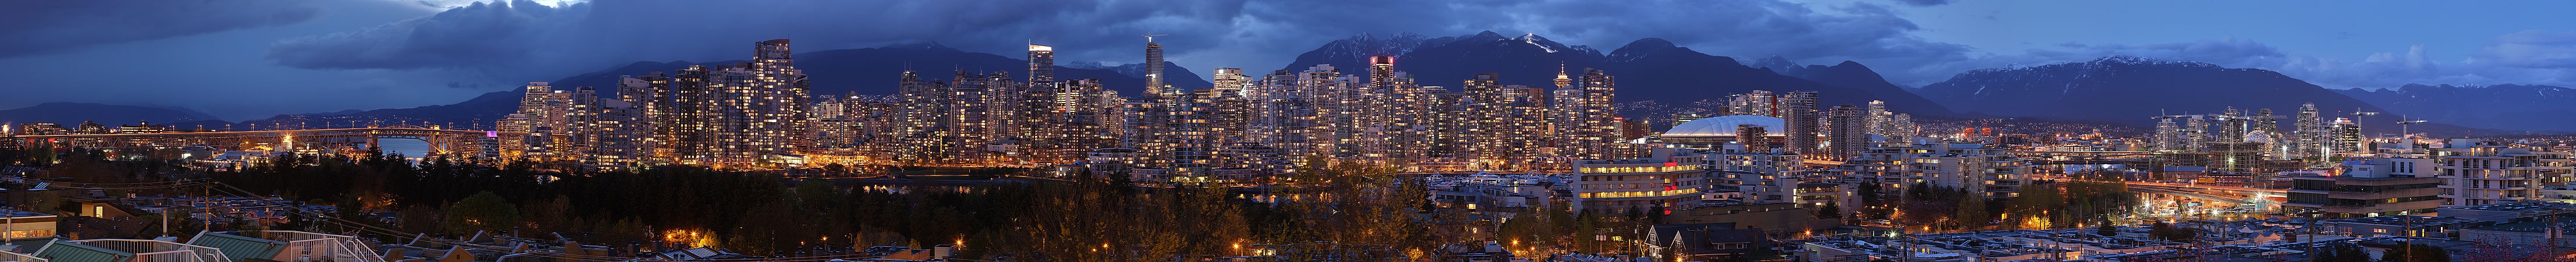 Vancouver, by Mfield